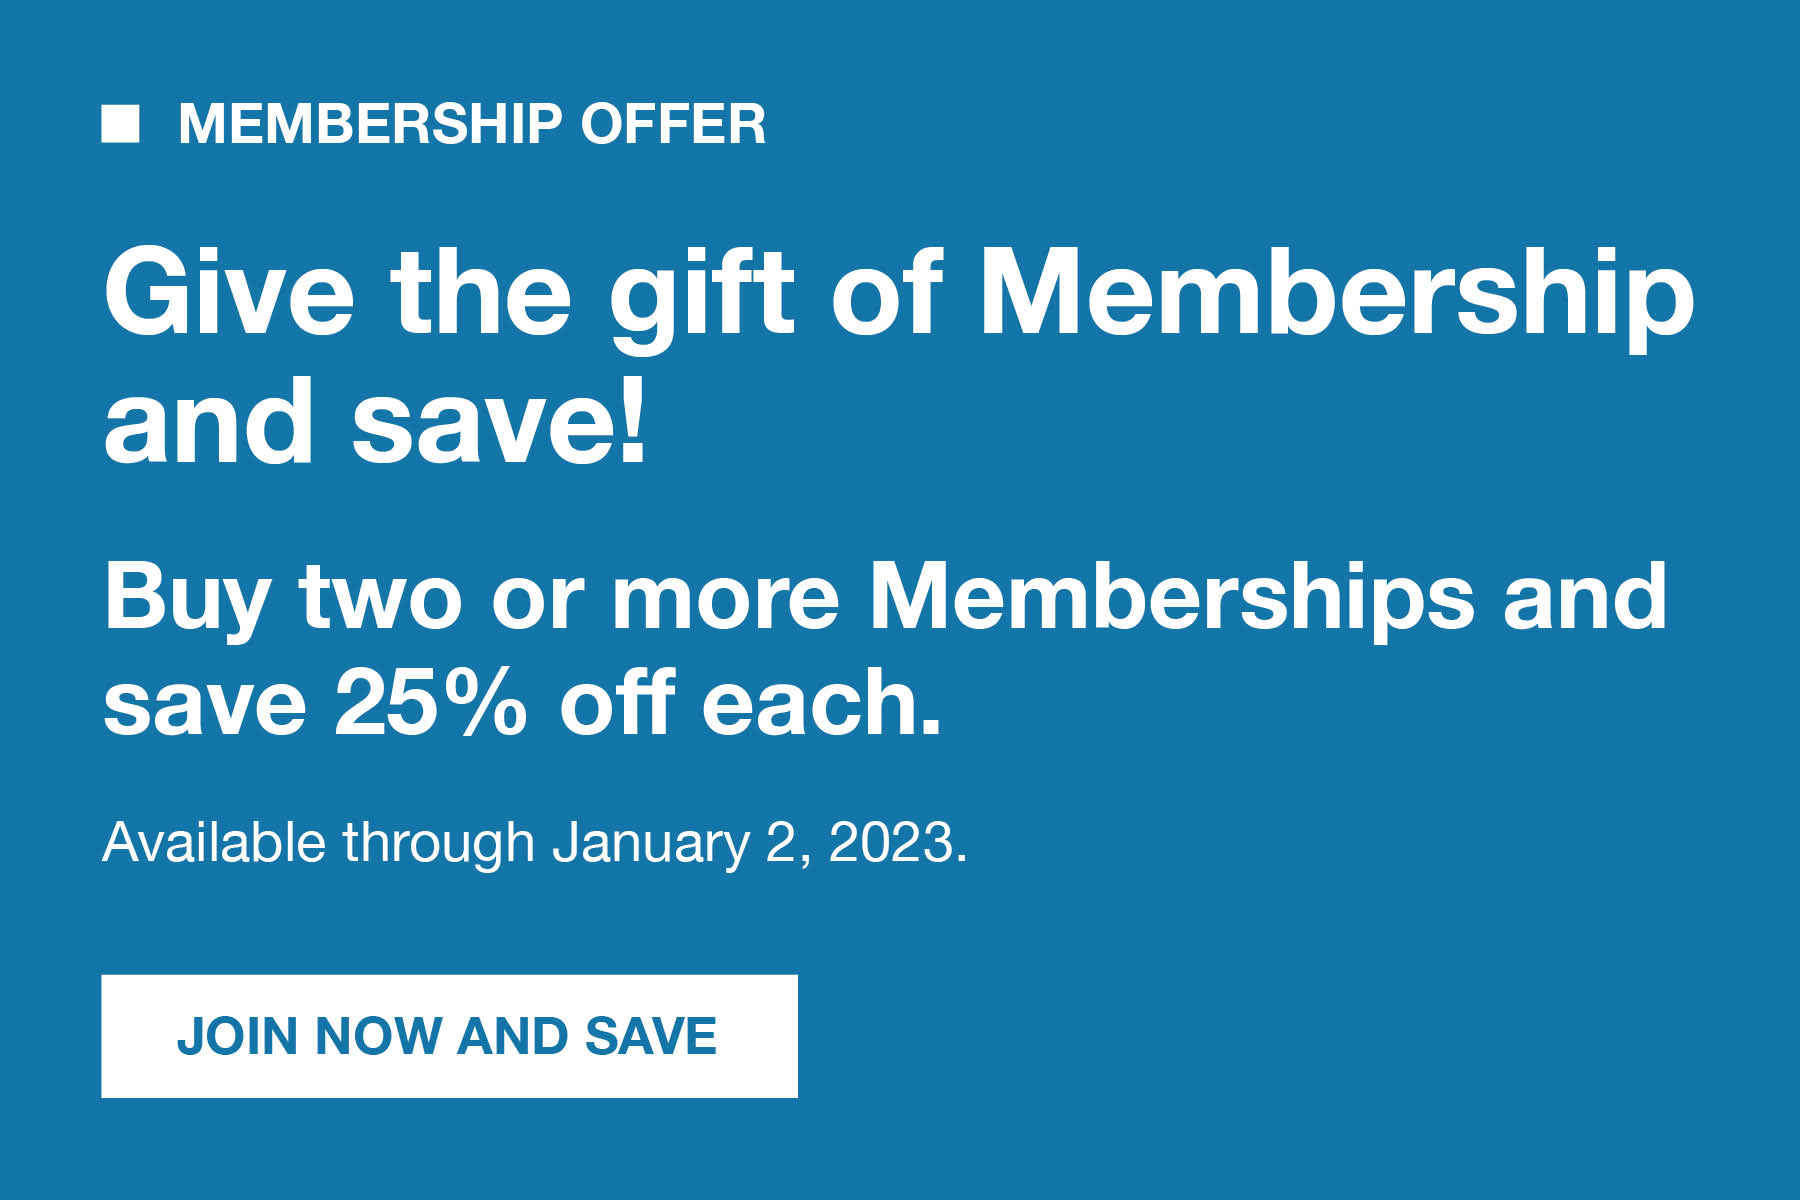 Membership Offer. Give the gift of Membership and save! Buy two or more Memberships and save 25% off each. Available through January 2, 2023. Click here to join and save.